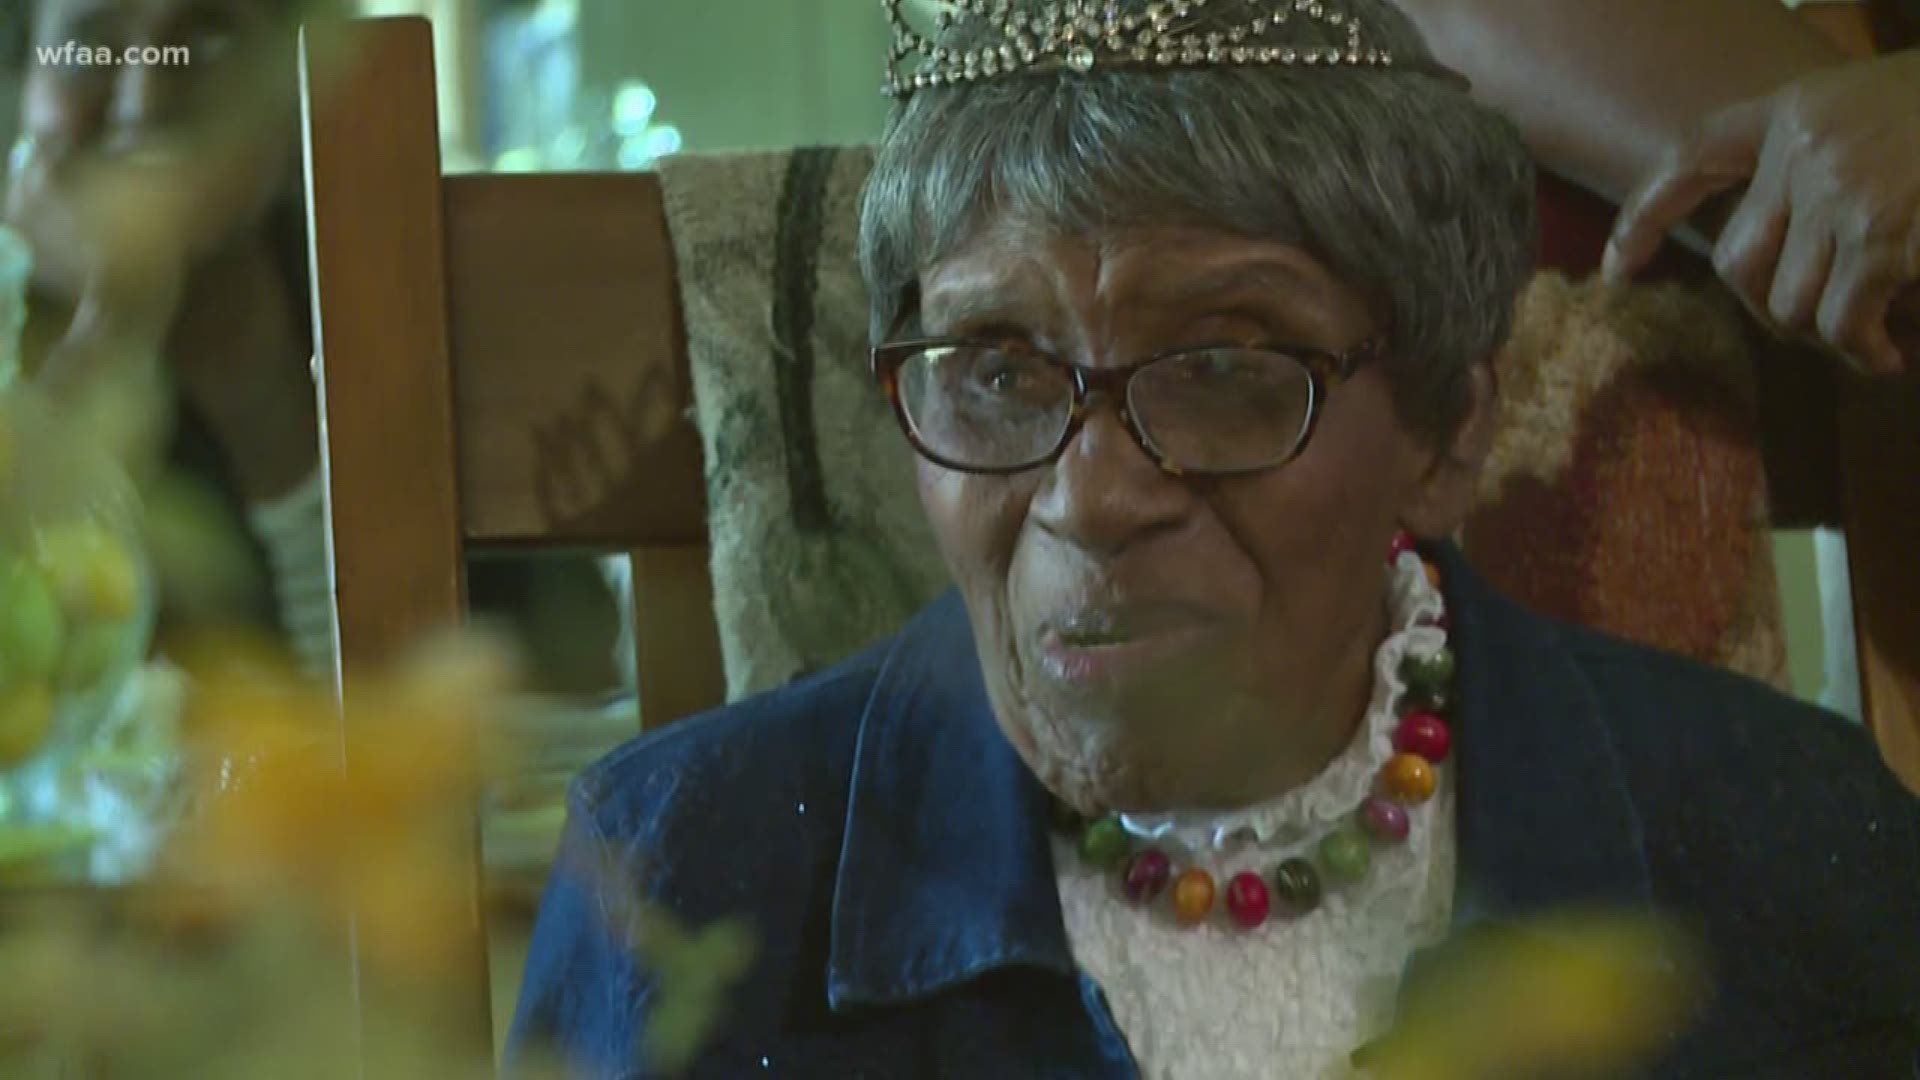 Fort Worth woman feels 'blessed' as she celebrates 105th birthday. Maurine Henry was honored by her congressman and Governor Abbott.